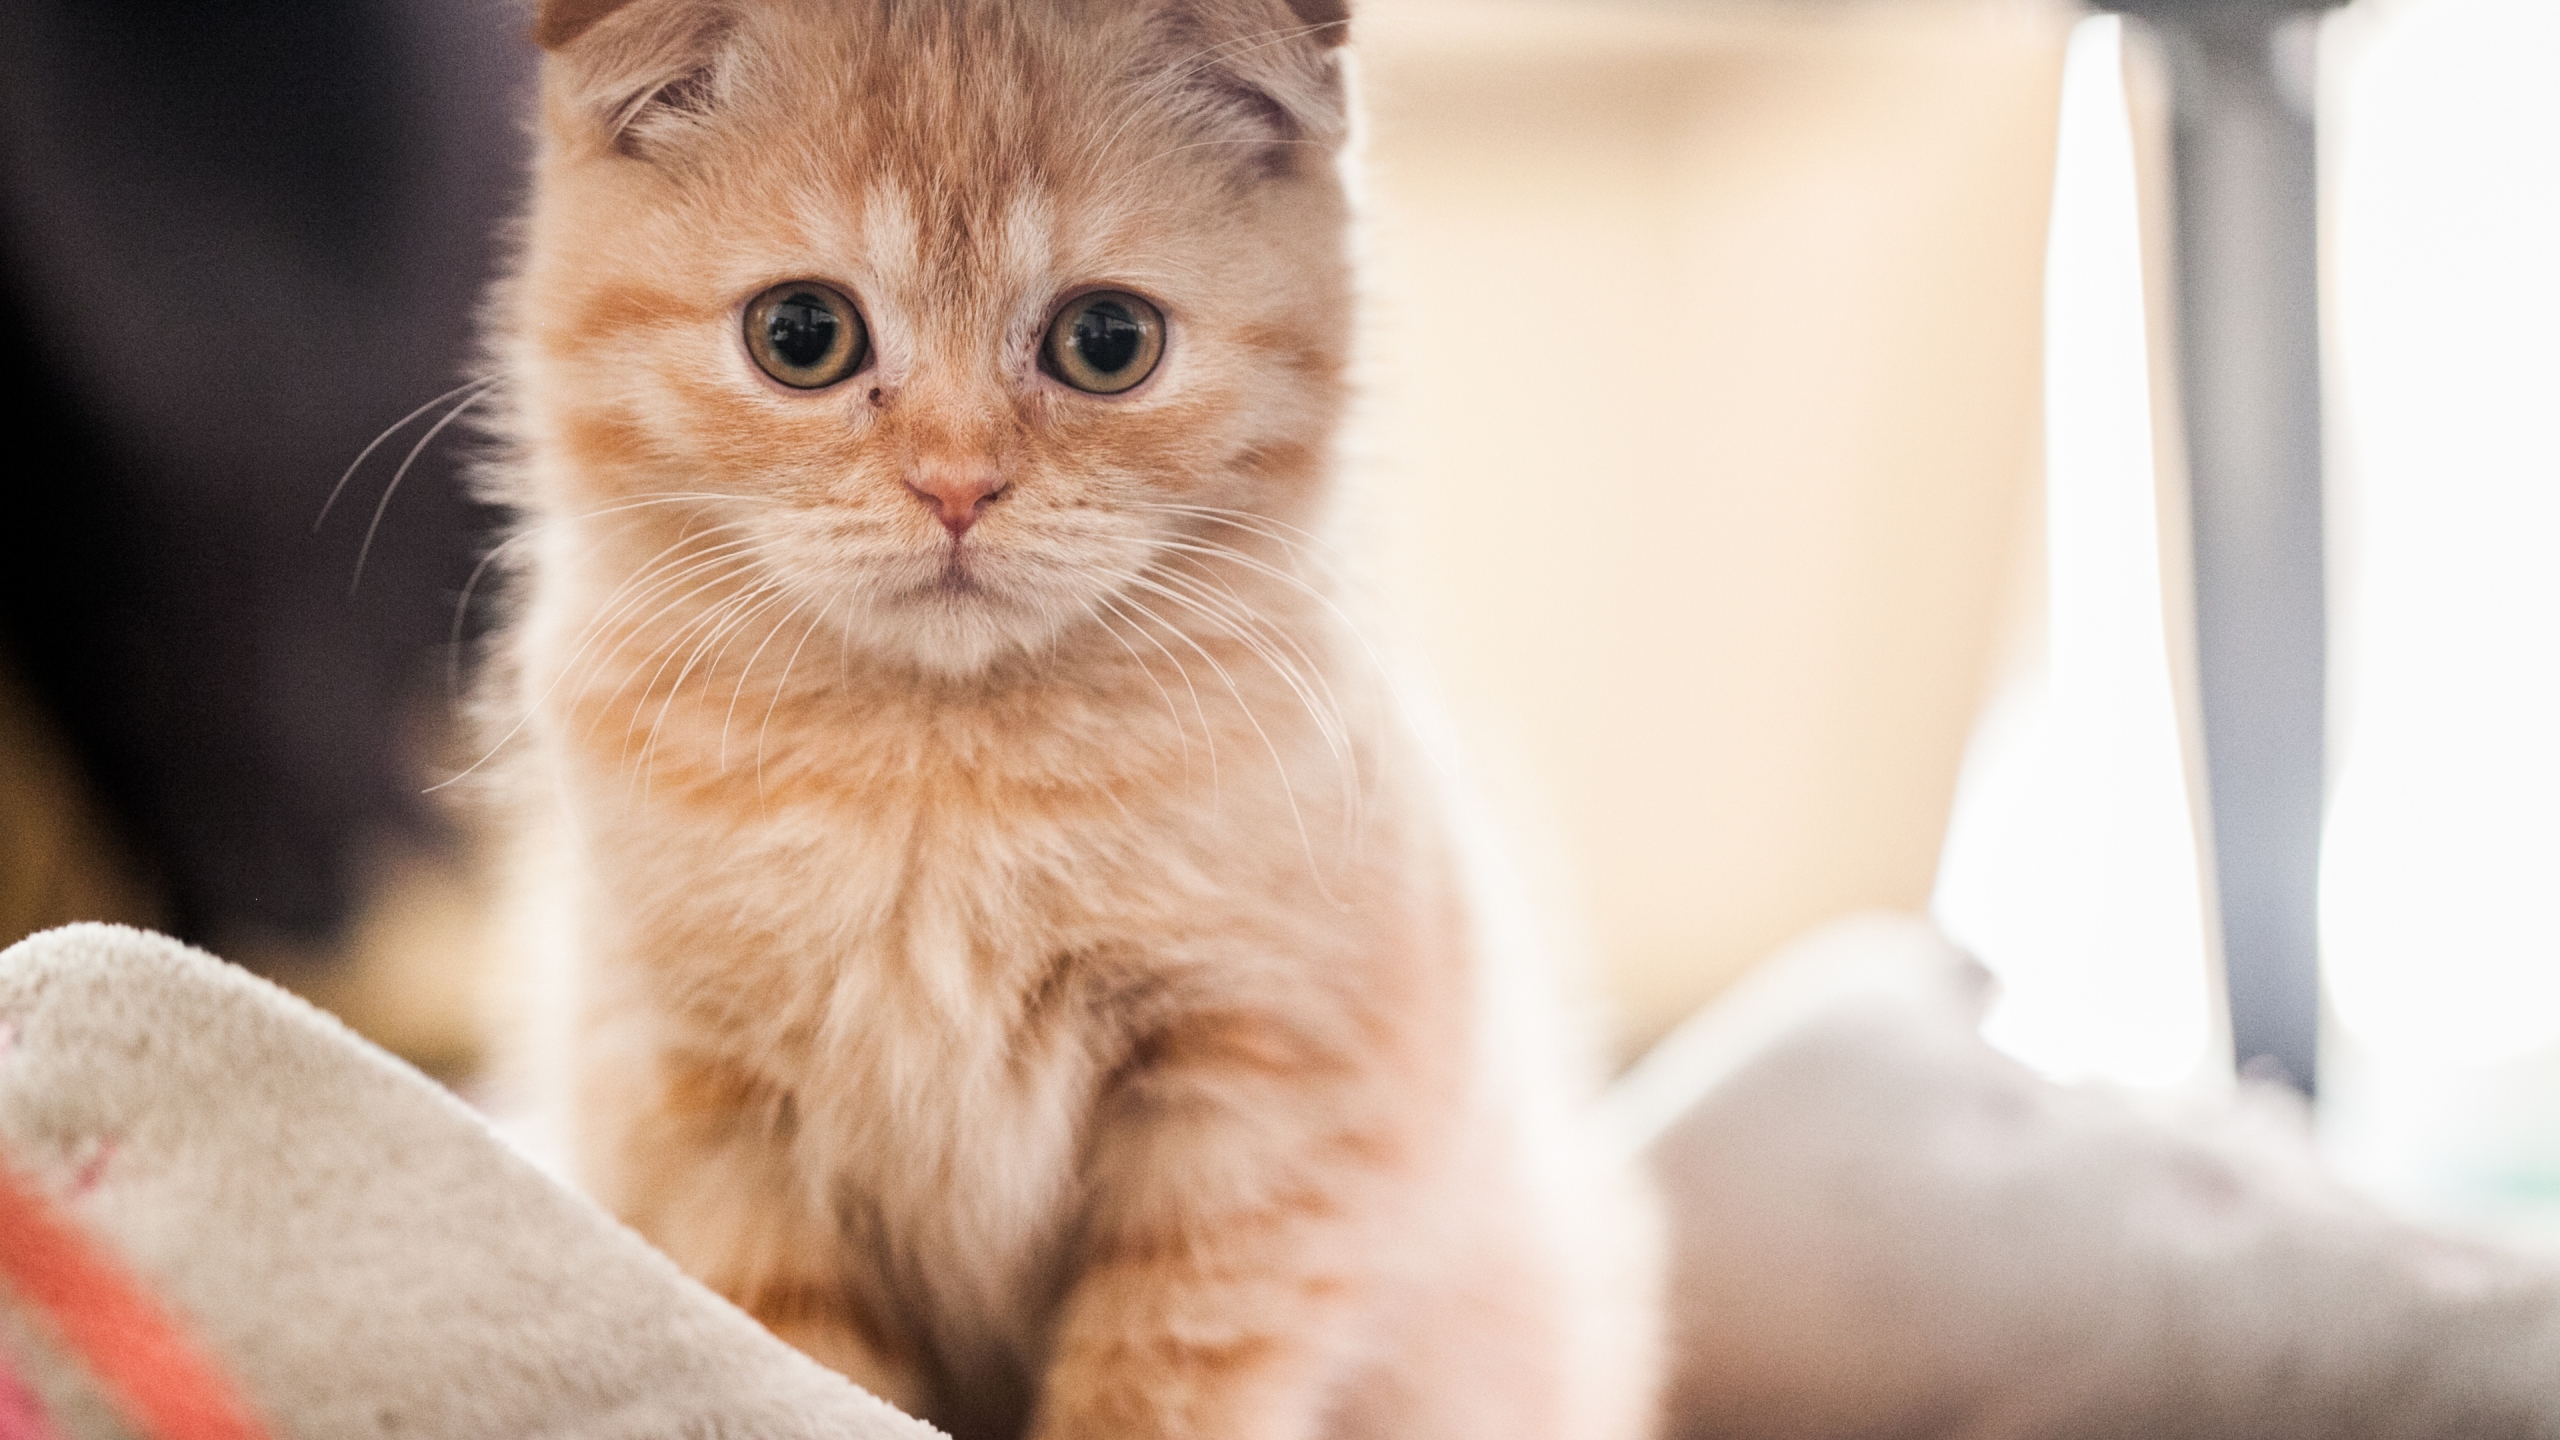 Small Red Scottish Fold Cat for 2560x1440 HDTV resolution